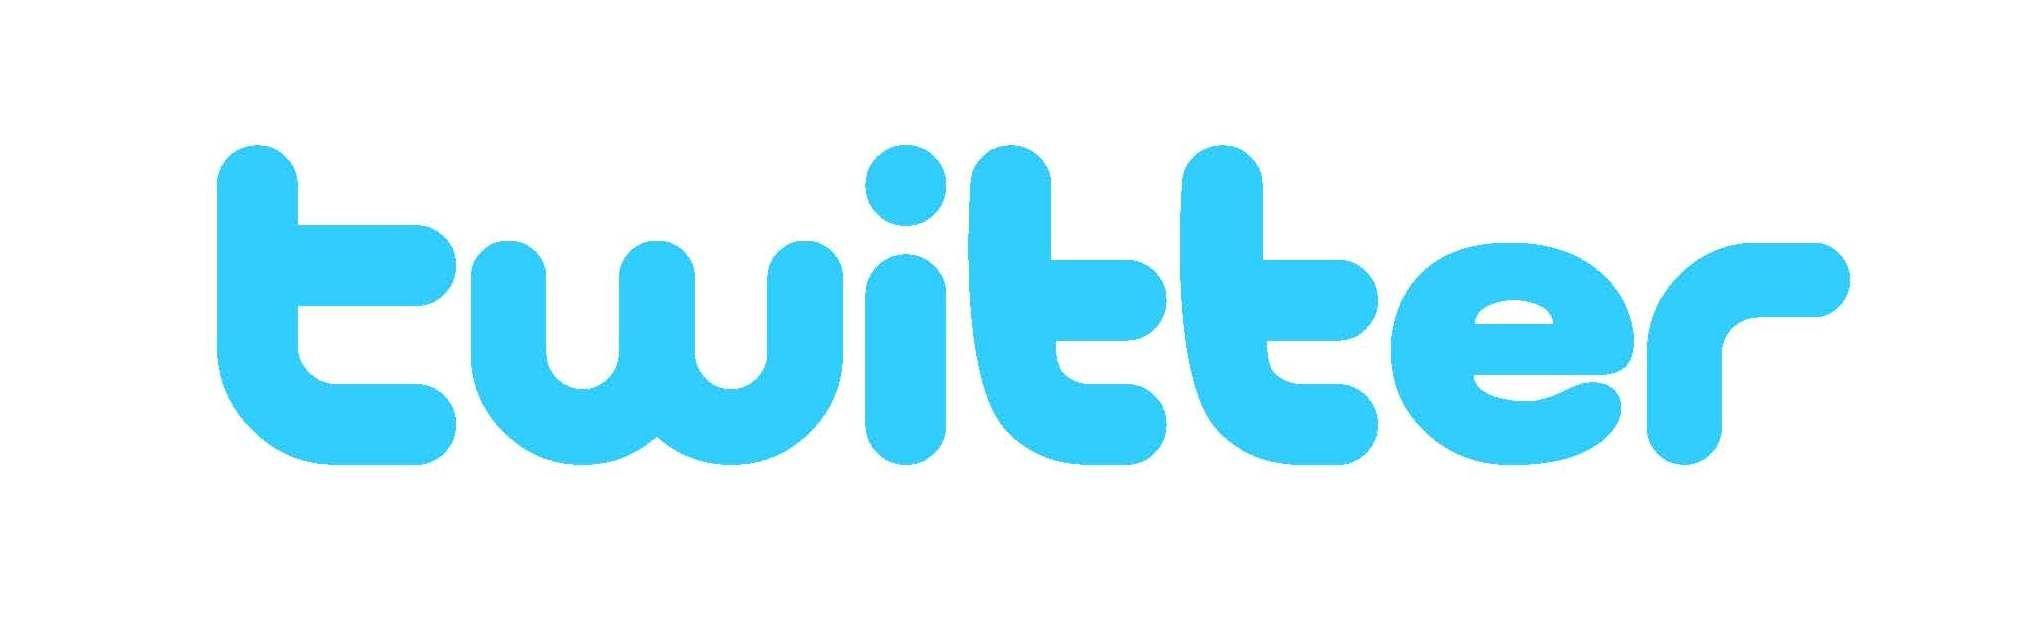 Twitter.com Logo - Twitter Chat: A quick guide for beginners | Escape - Official Travel ...